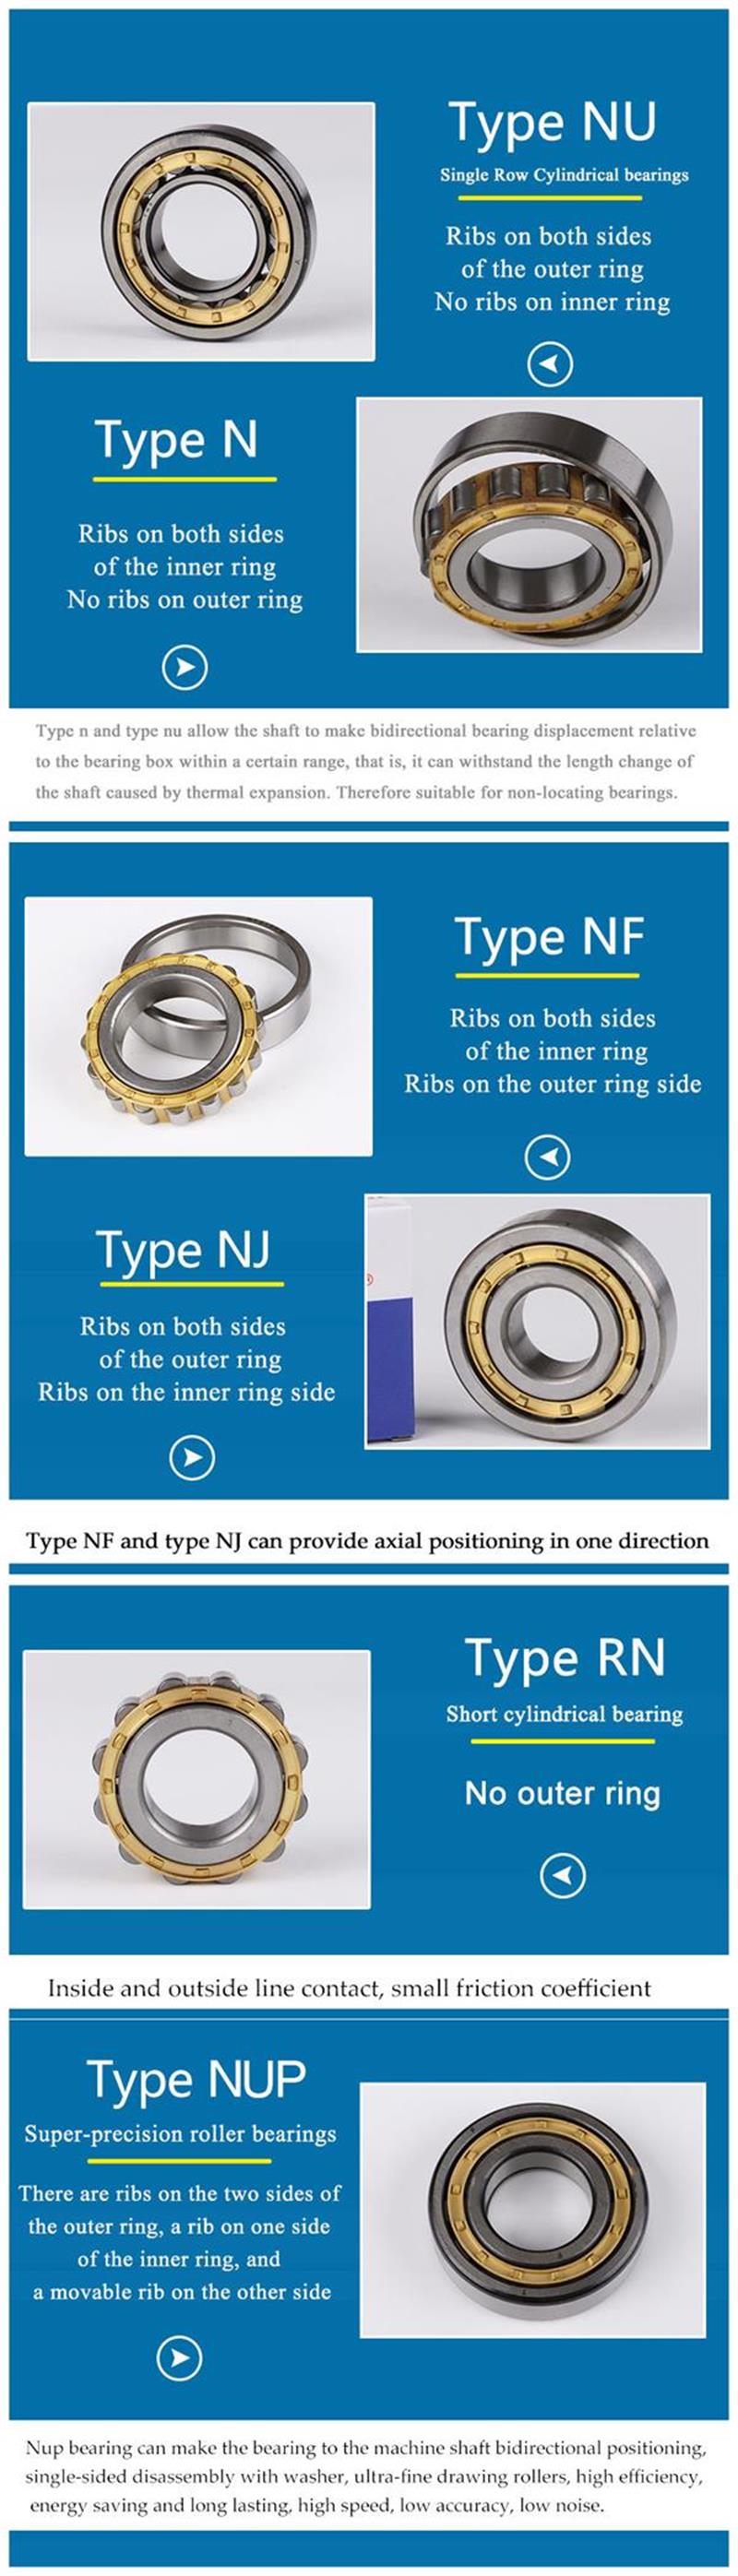 Jinis roller bearing cylindrical